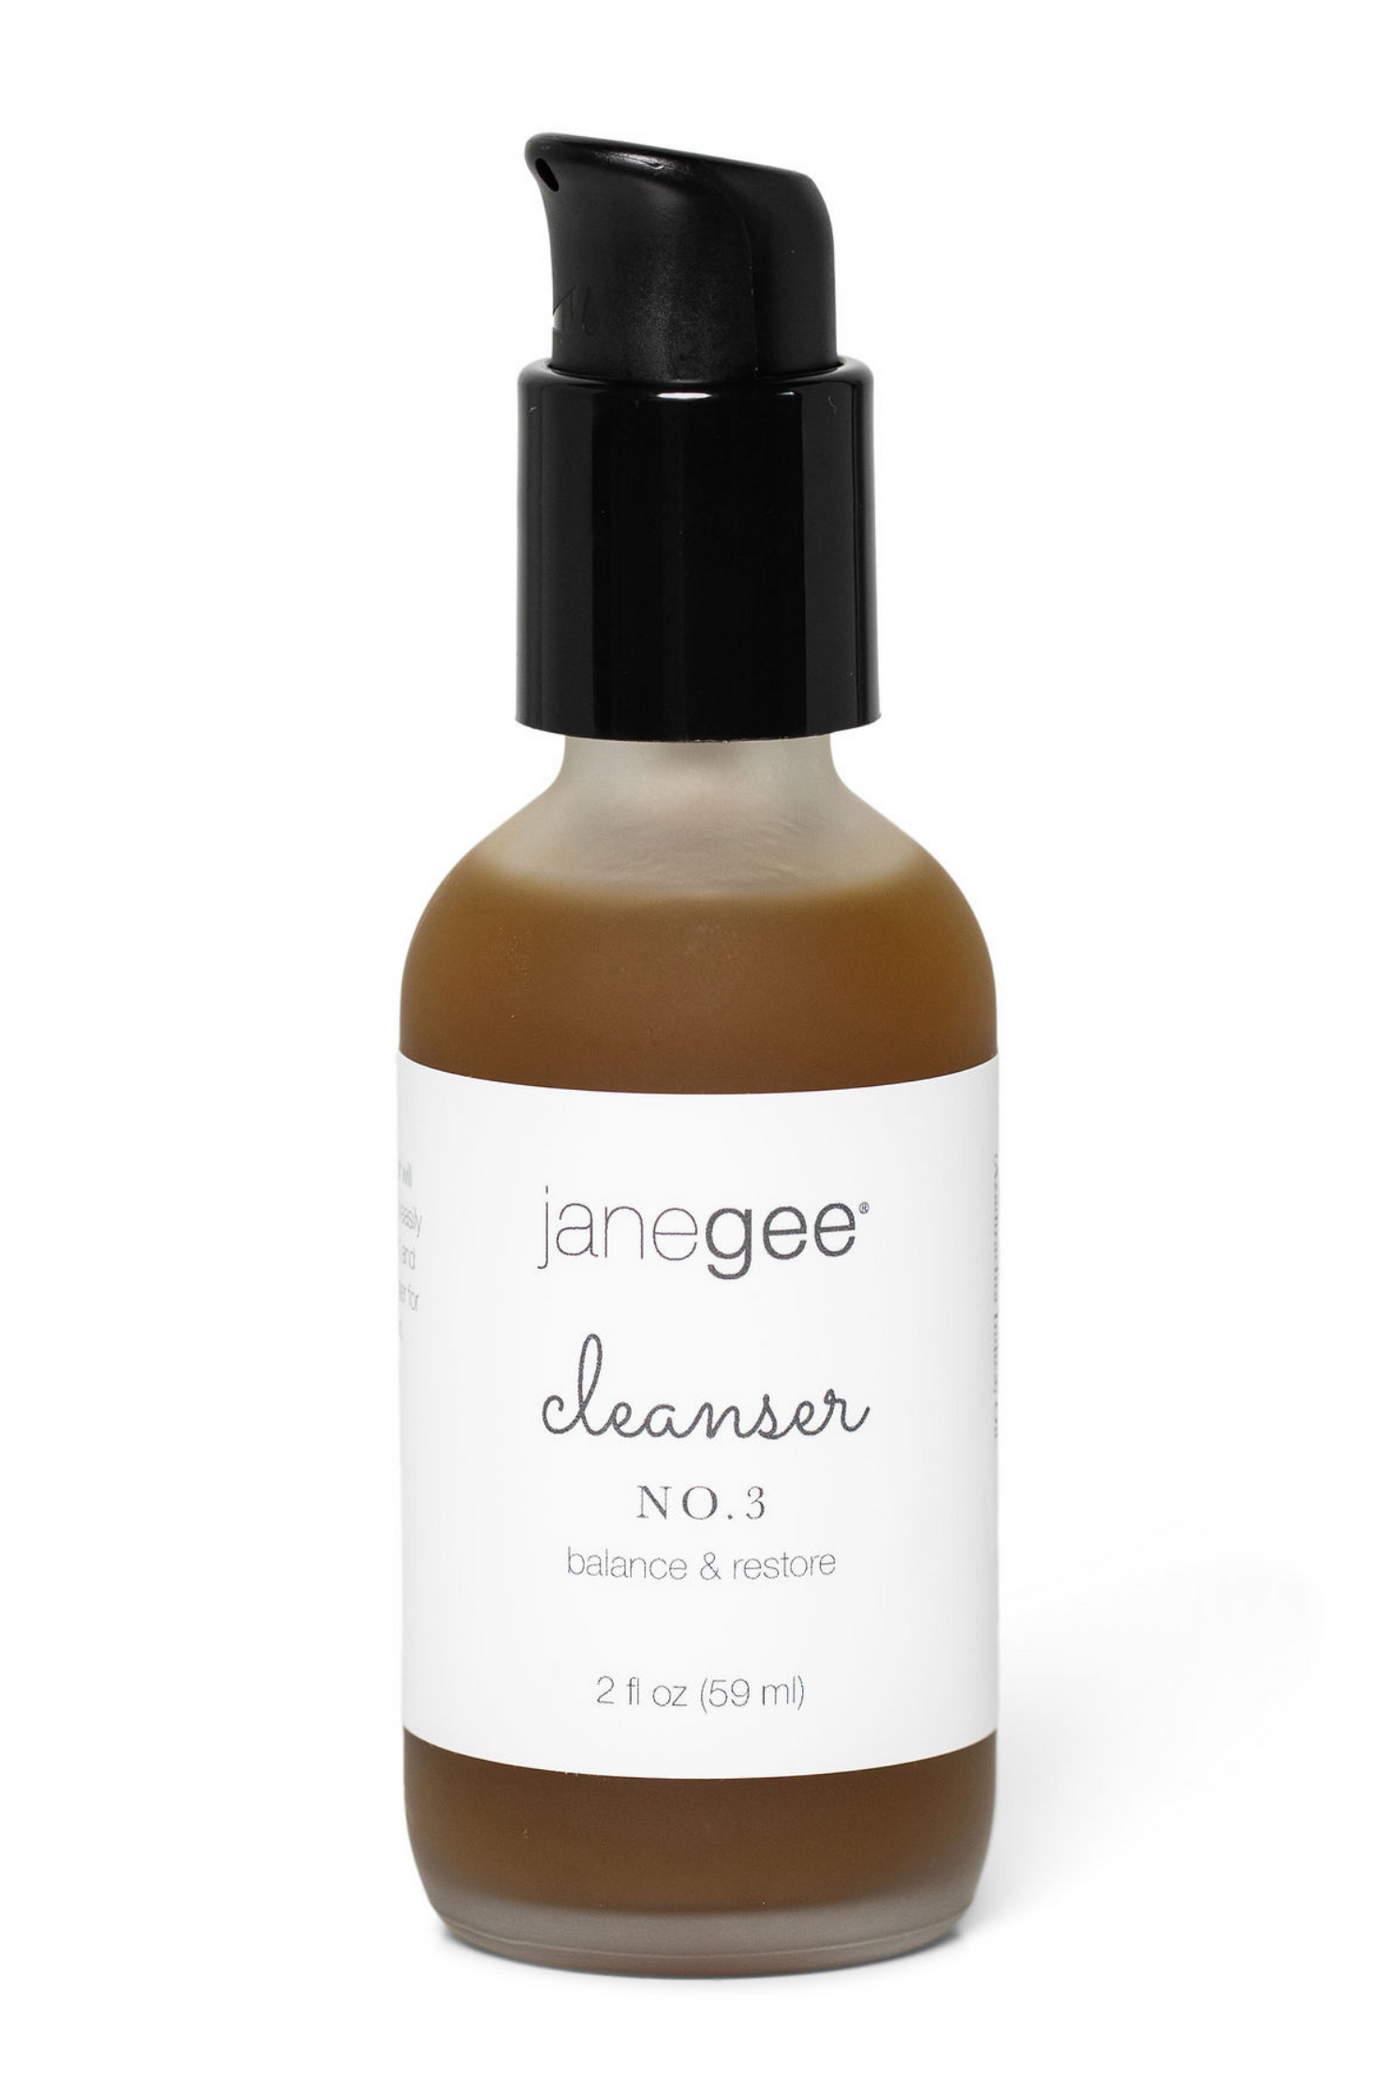 janegee Cleanser No.3